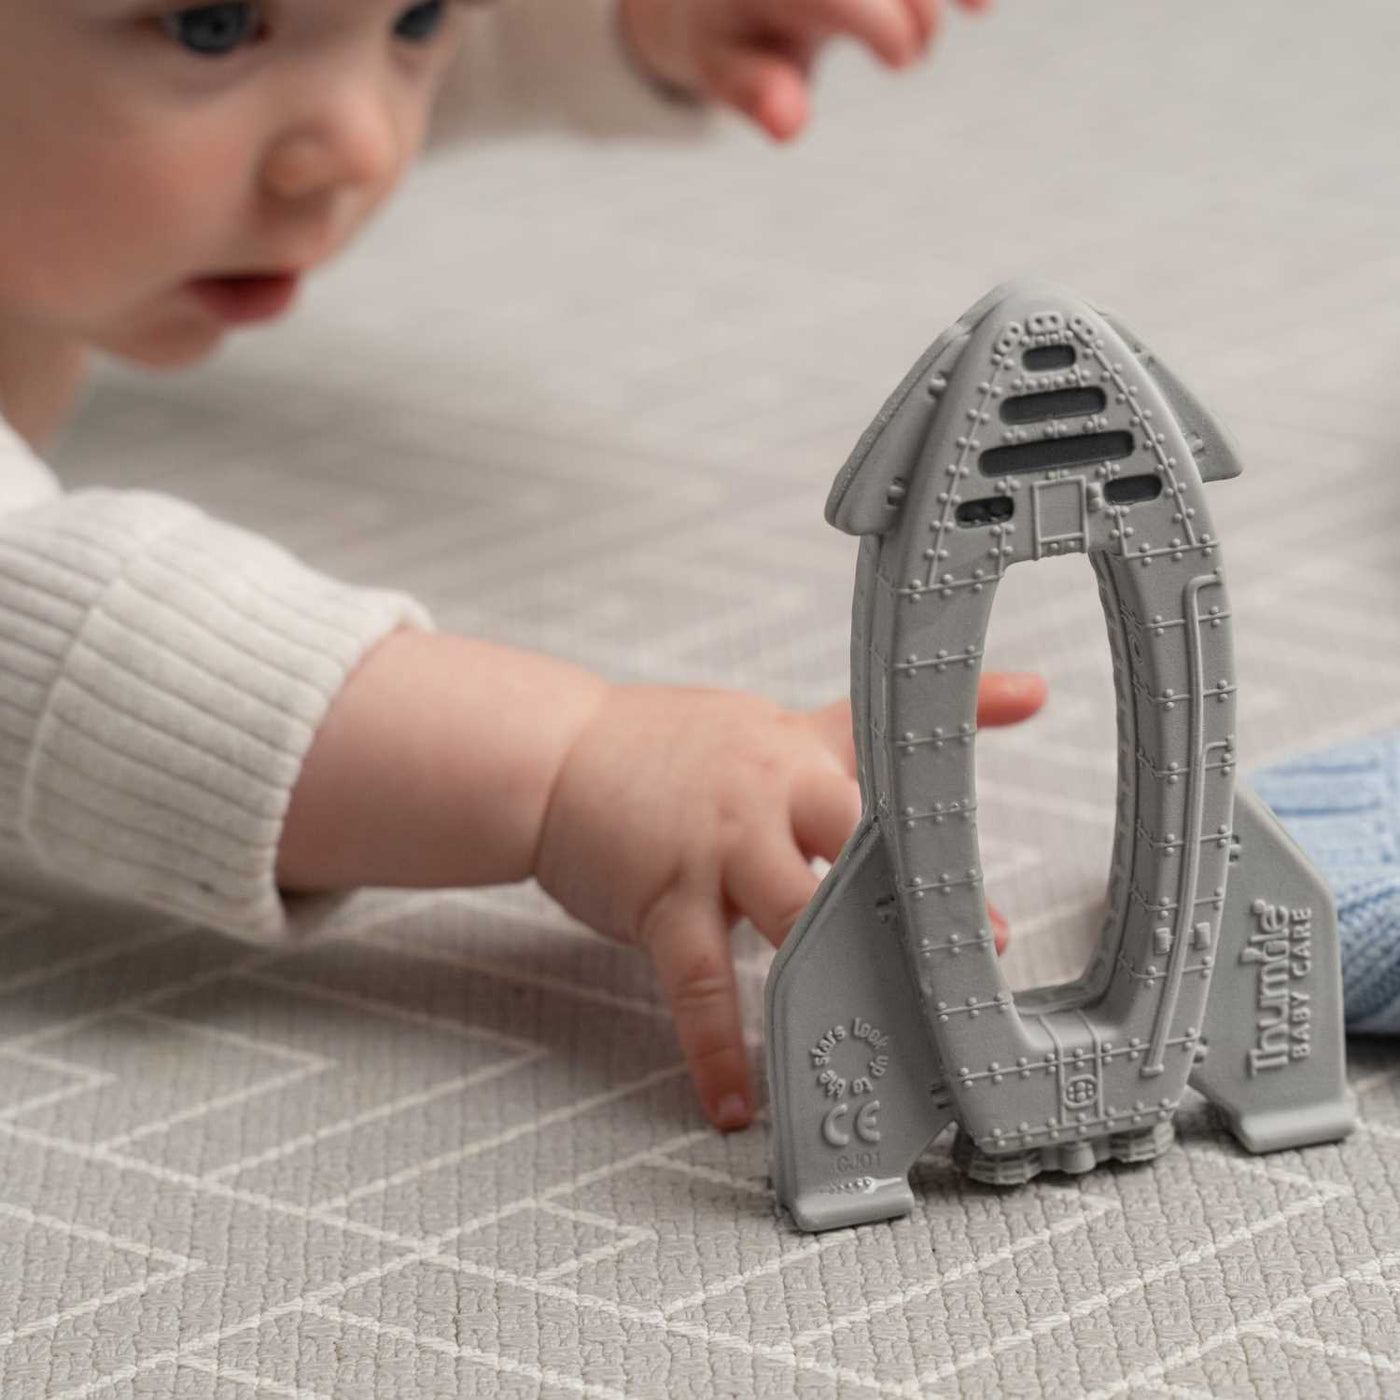 Baby on a playmat during tummy time reaching for a rocket shaped baby toy